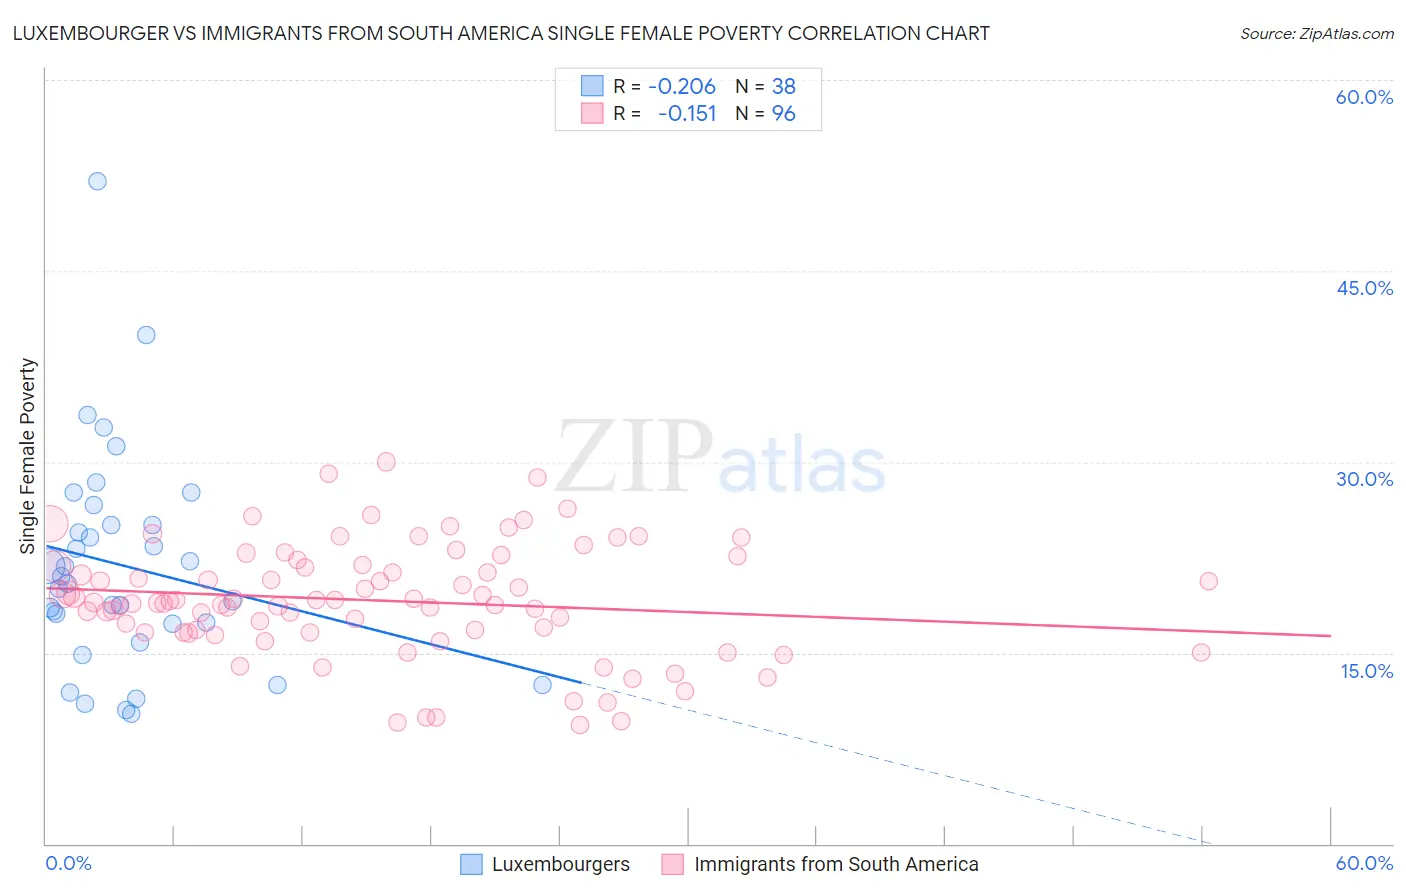 Luxembourger vs Immigrants from South America Single Female Poverty